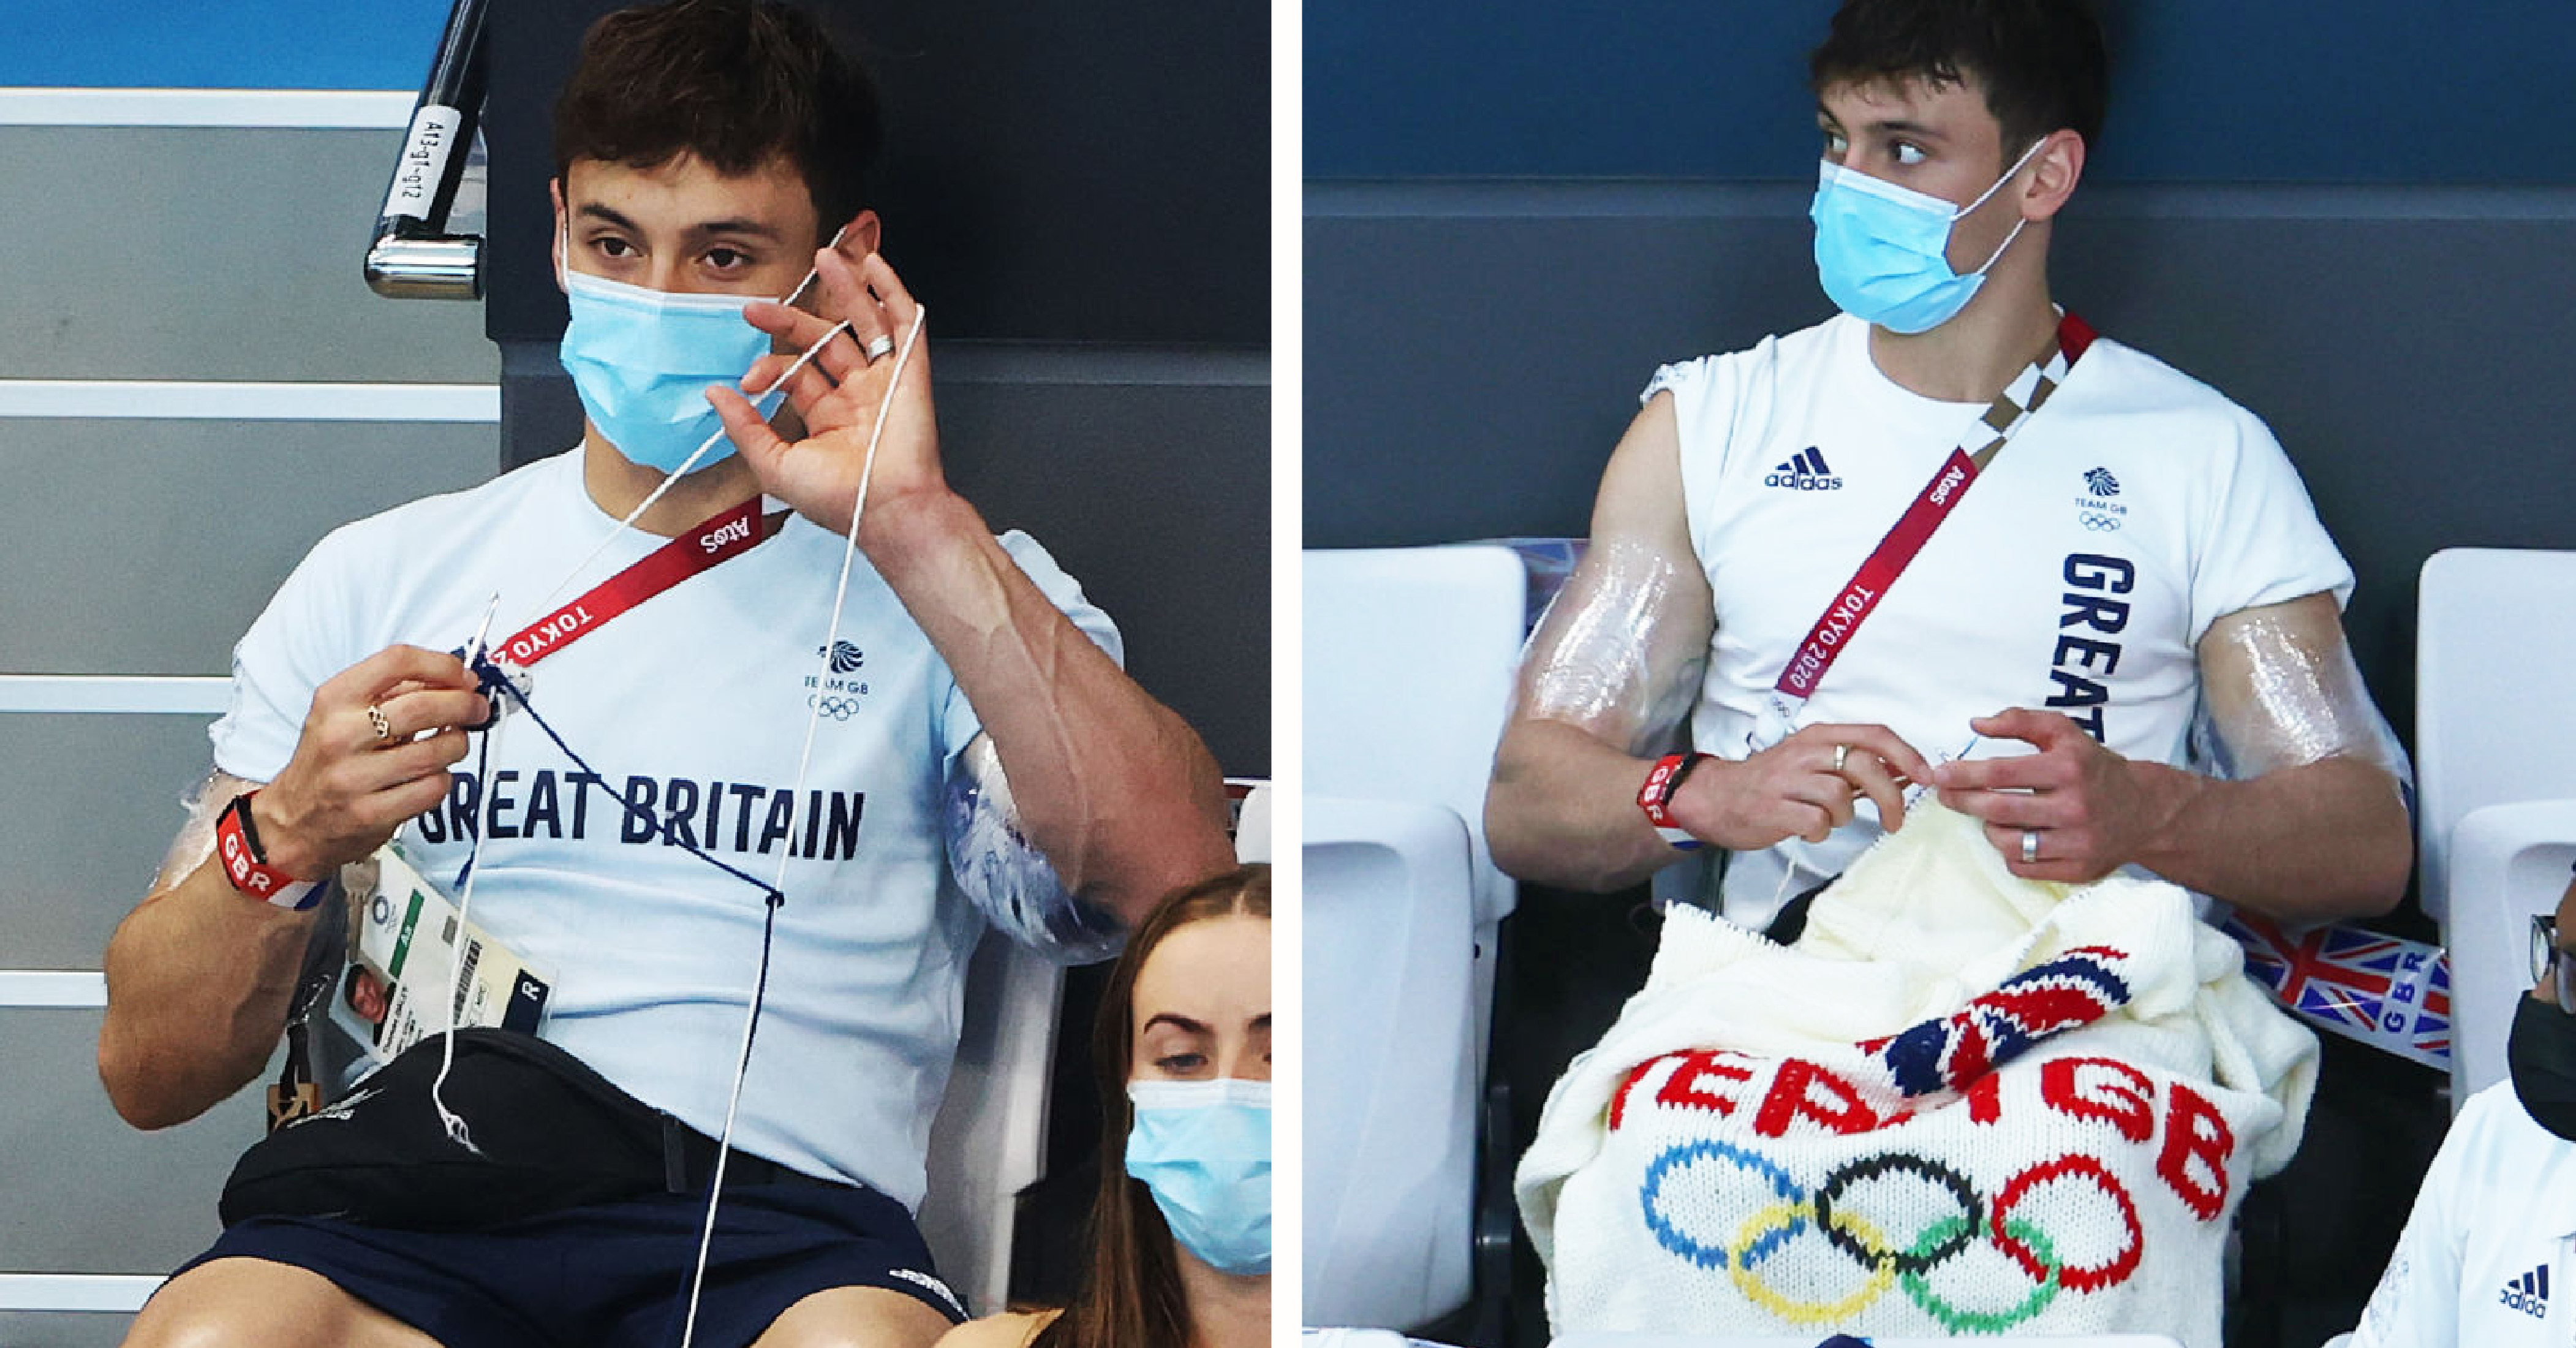 Tom Daley Wears Sweater he Knitted Himself on Today